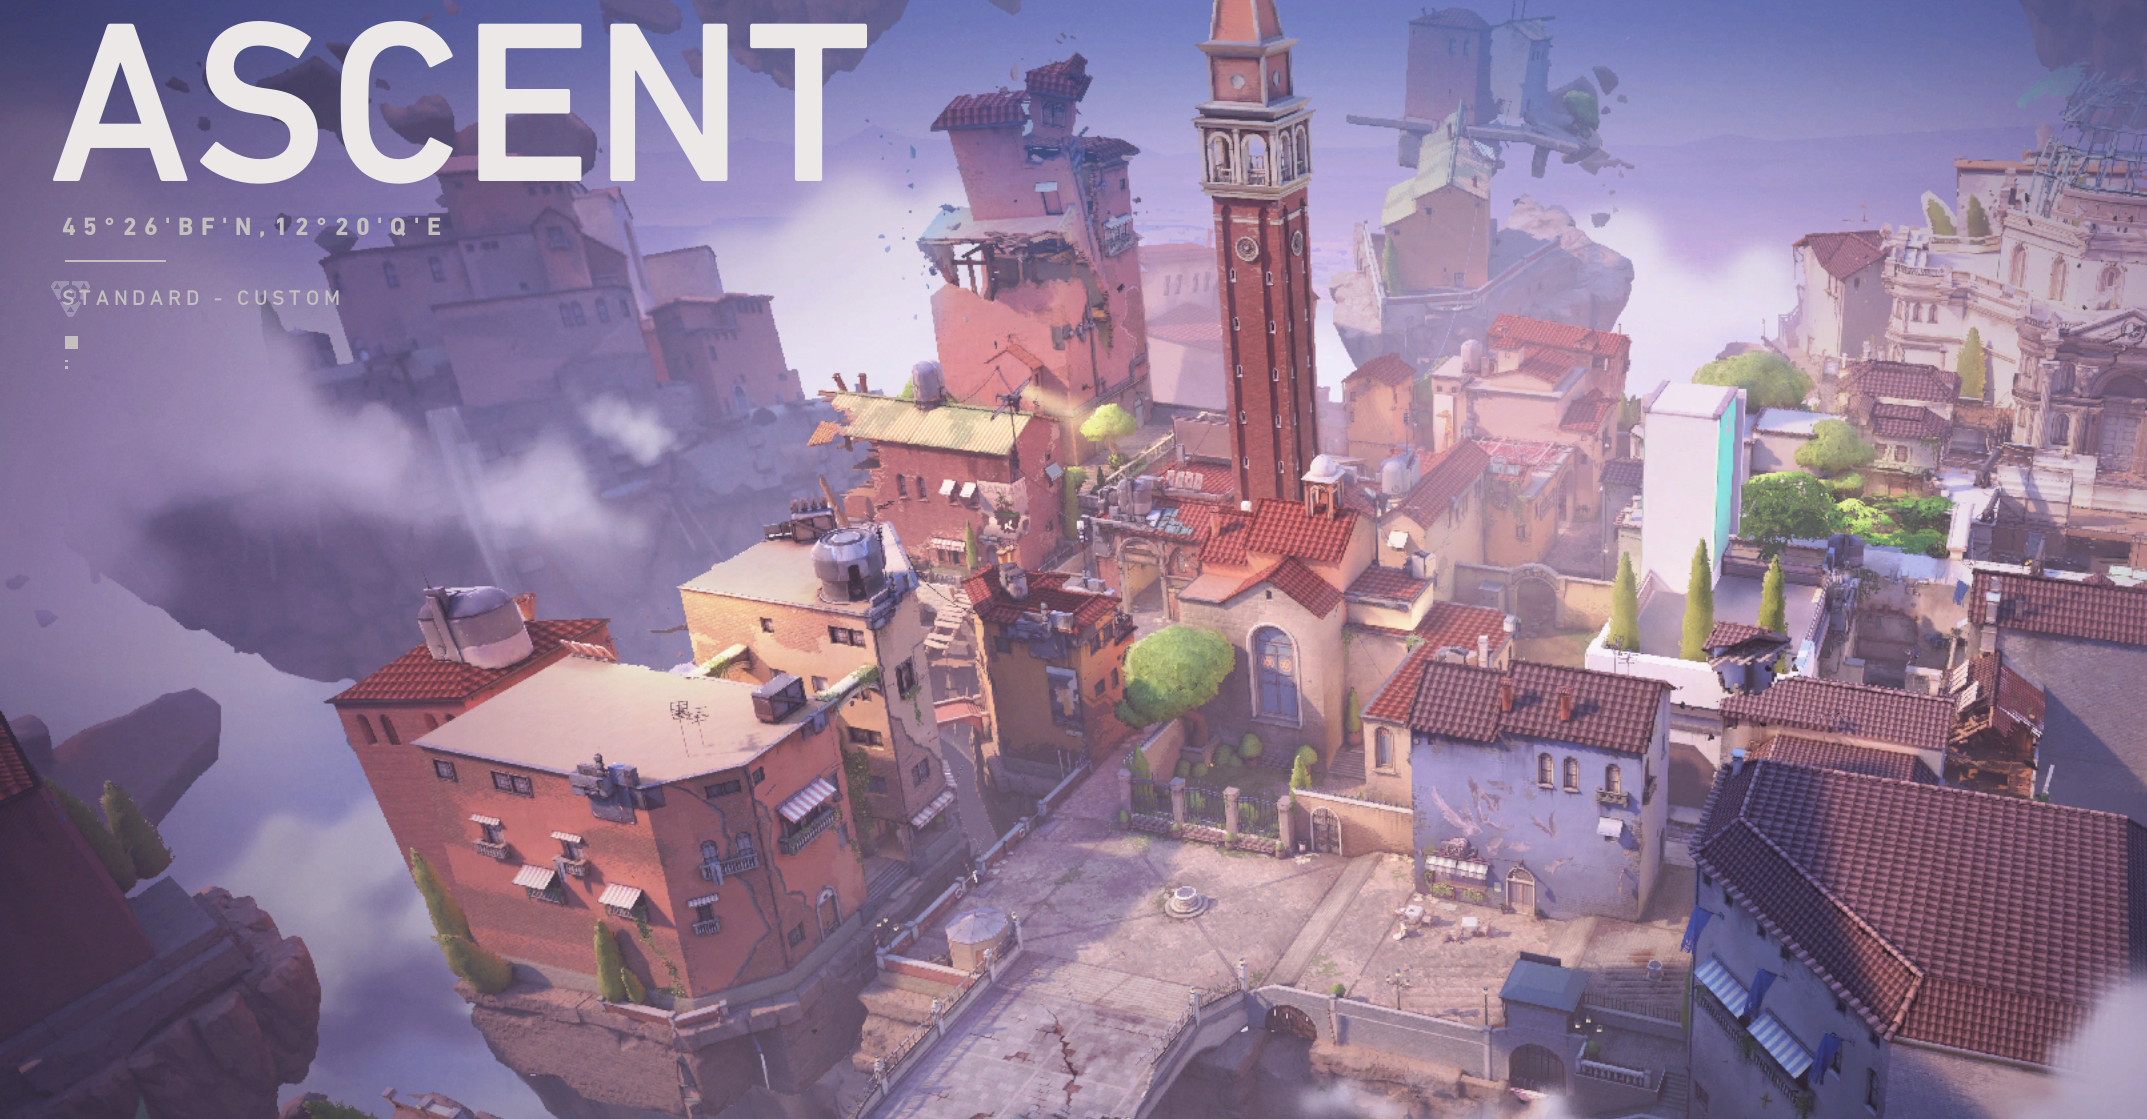 Valorant Ascent map callouts & tips